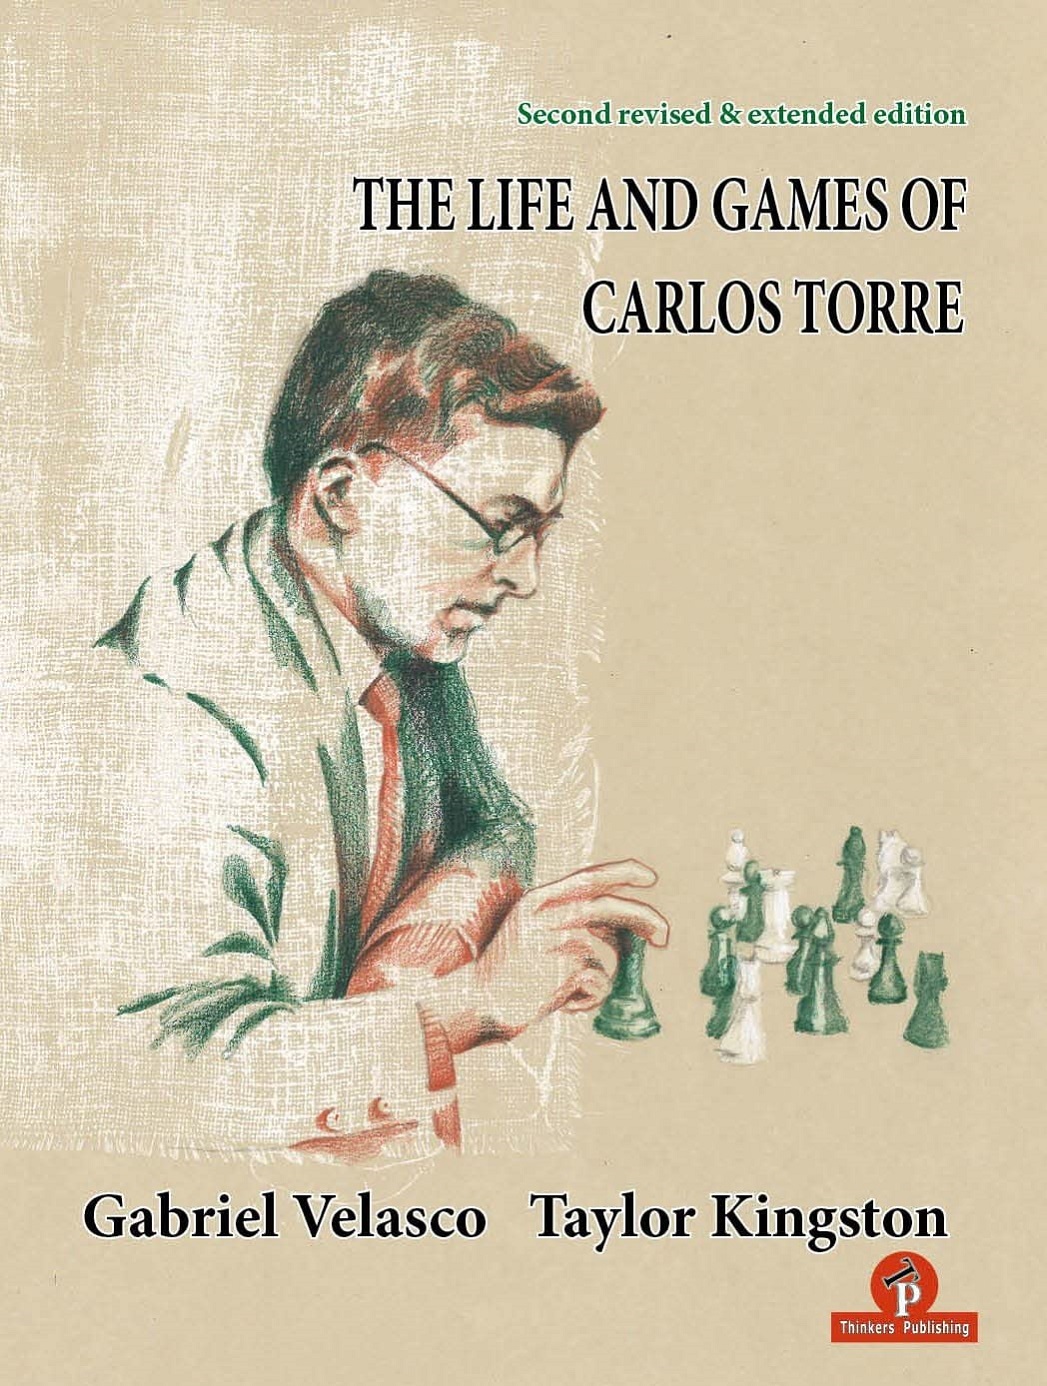 The life and games of Carlos Torre